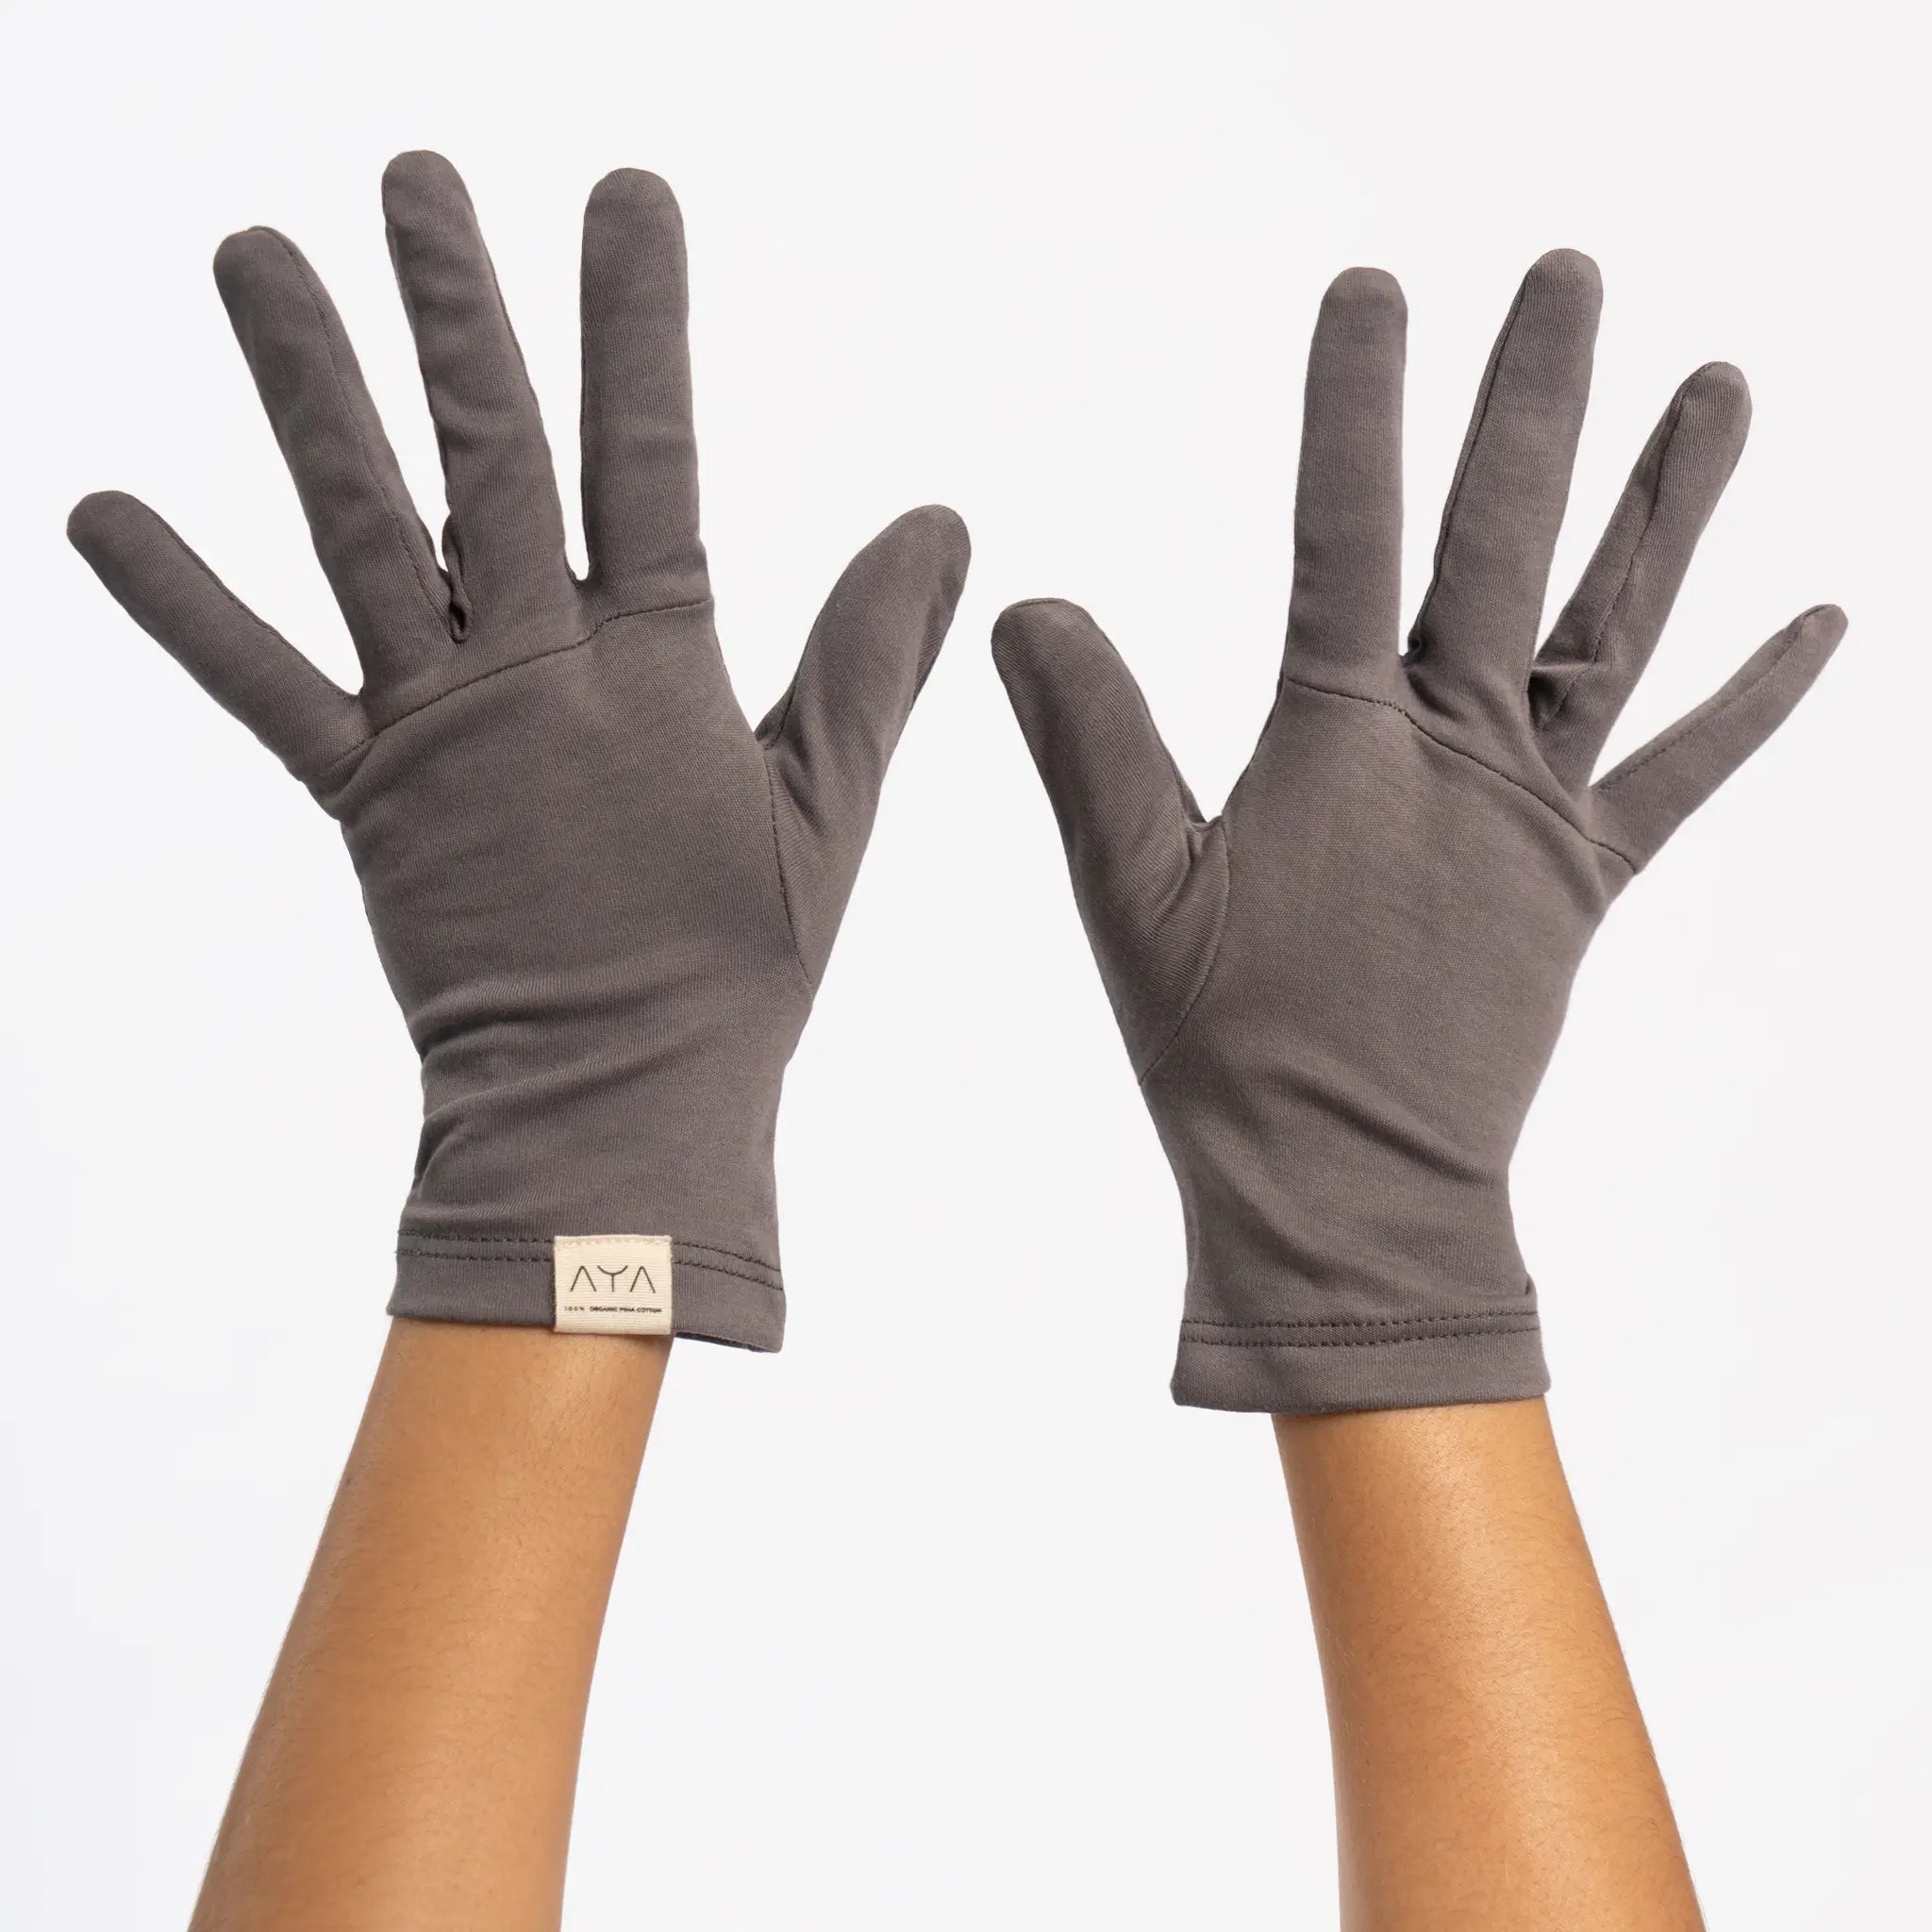 unisex most comfortable gloves color natural gray